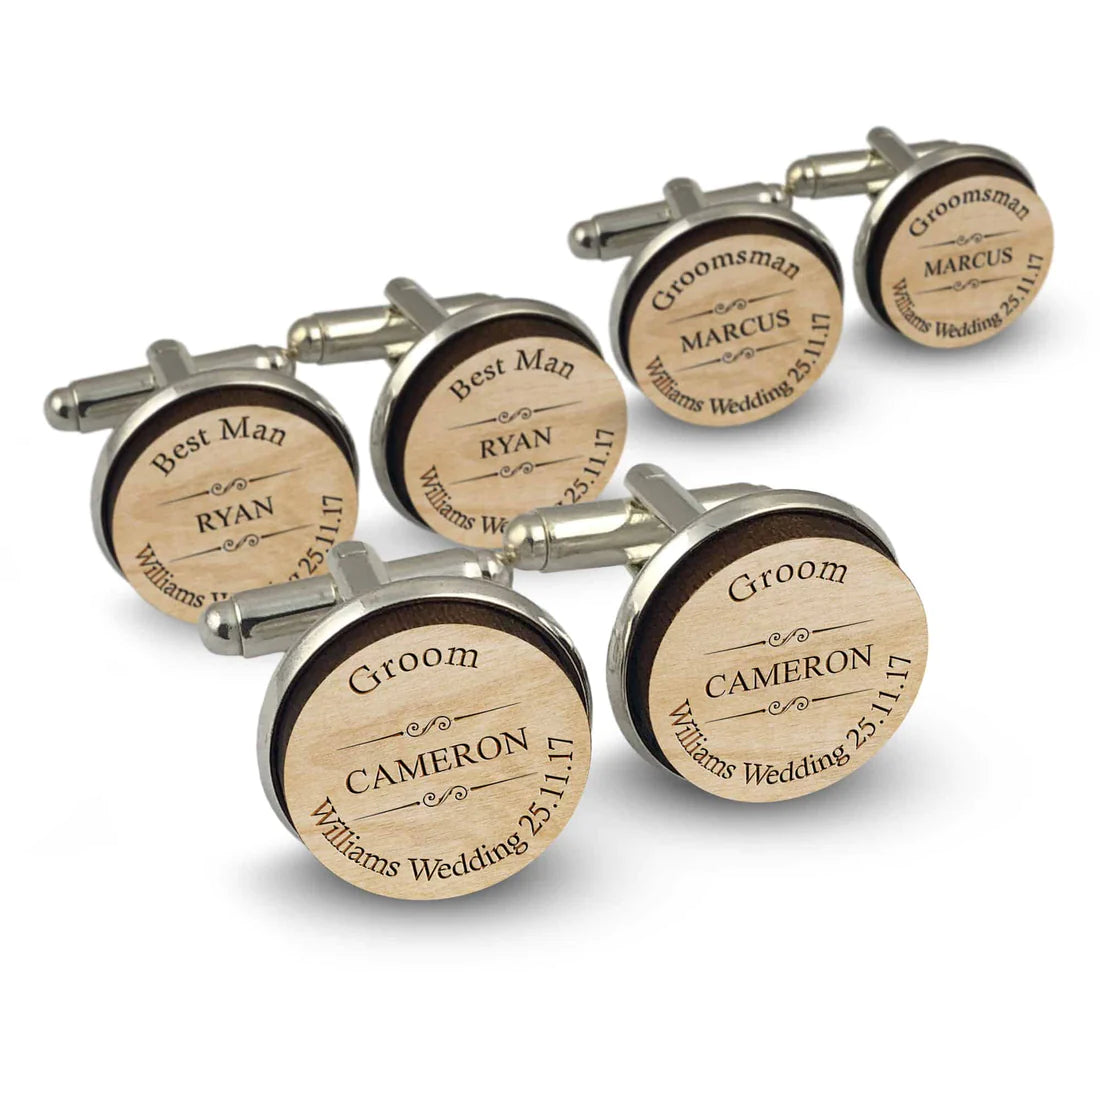 Personalised Cufflinks from an Australian Owned Business – The Perfect Gift for Your Wedding Day